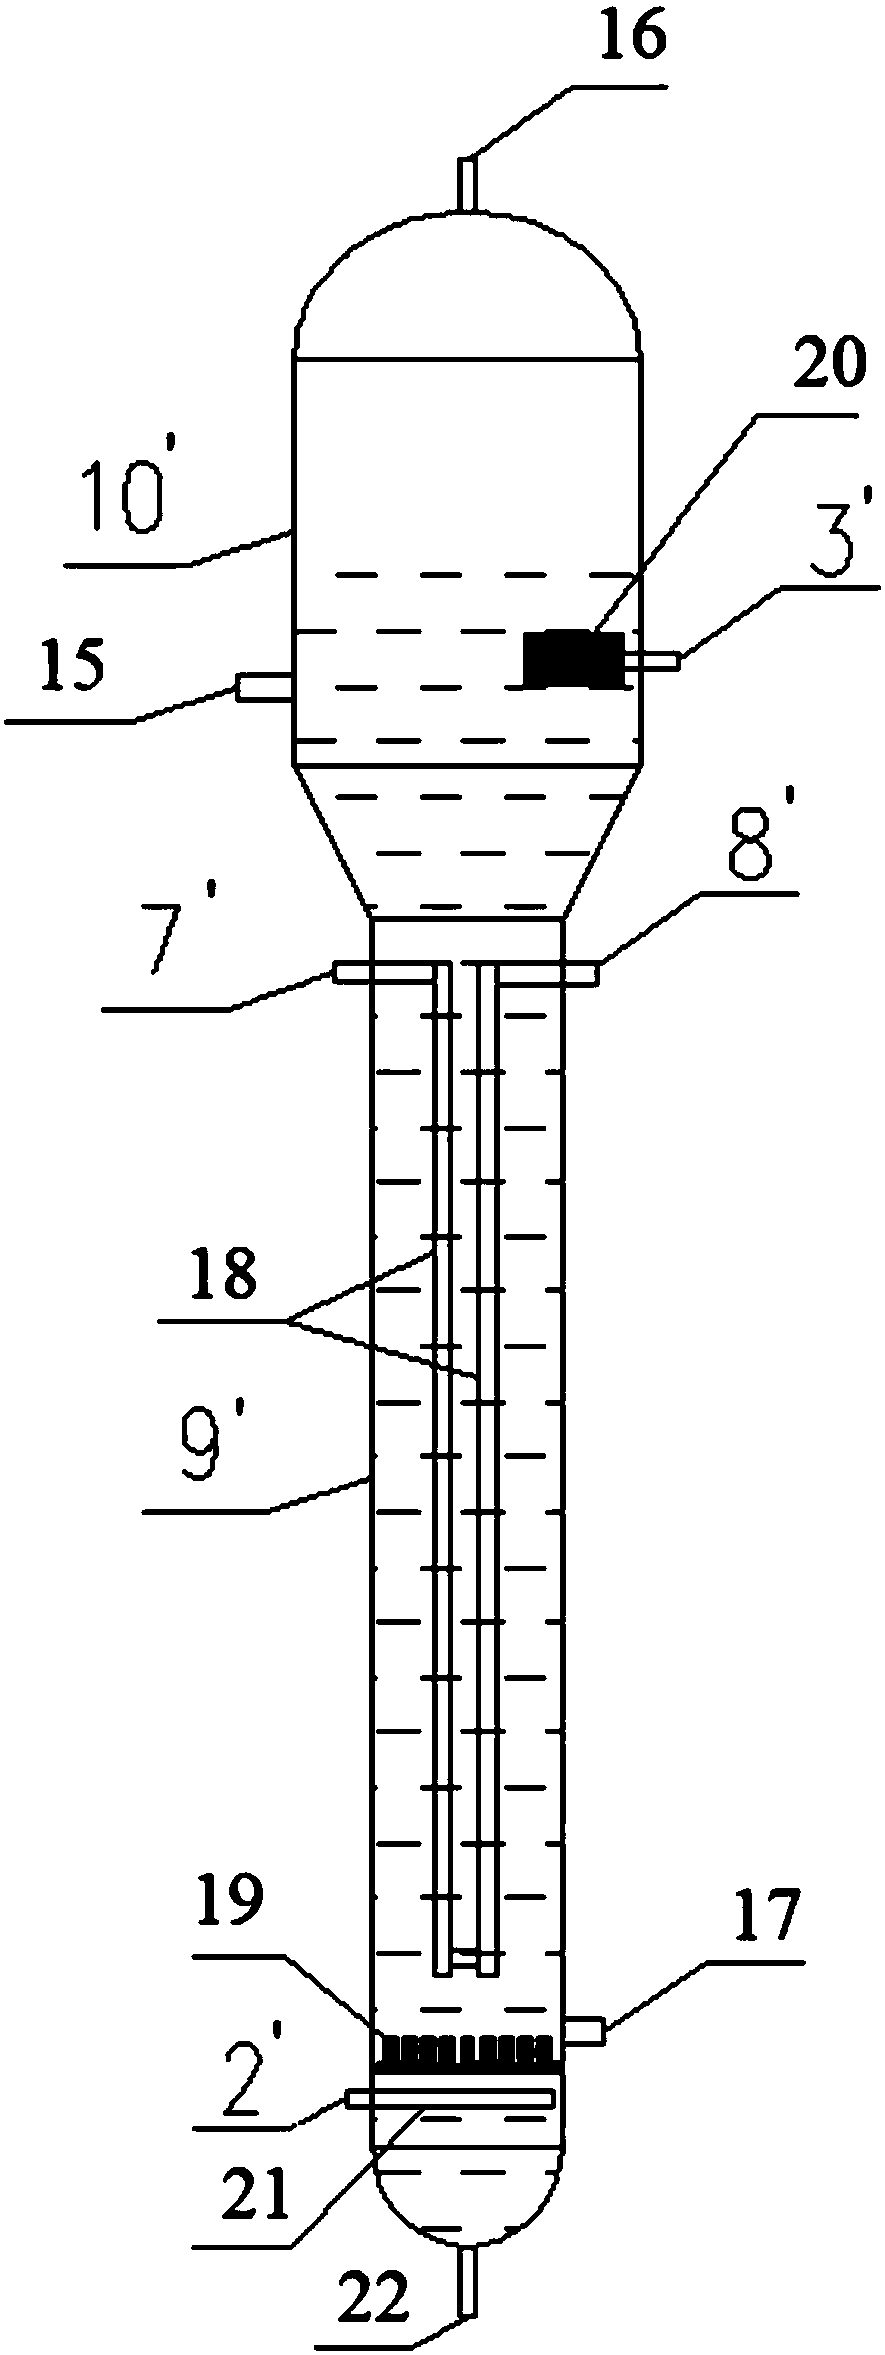 Chemical reaction device and application thereof